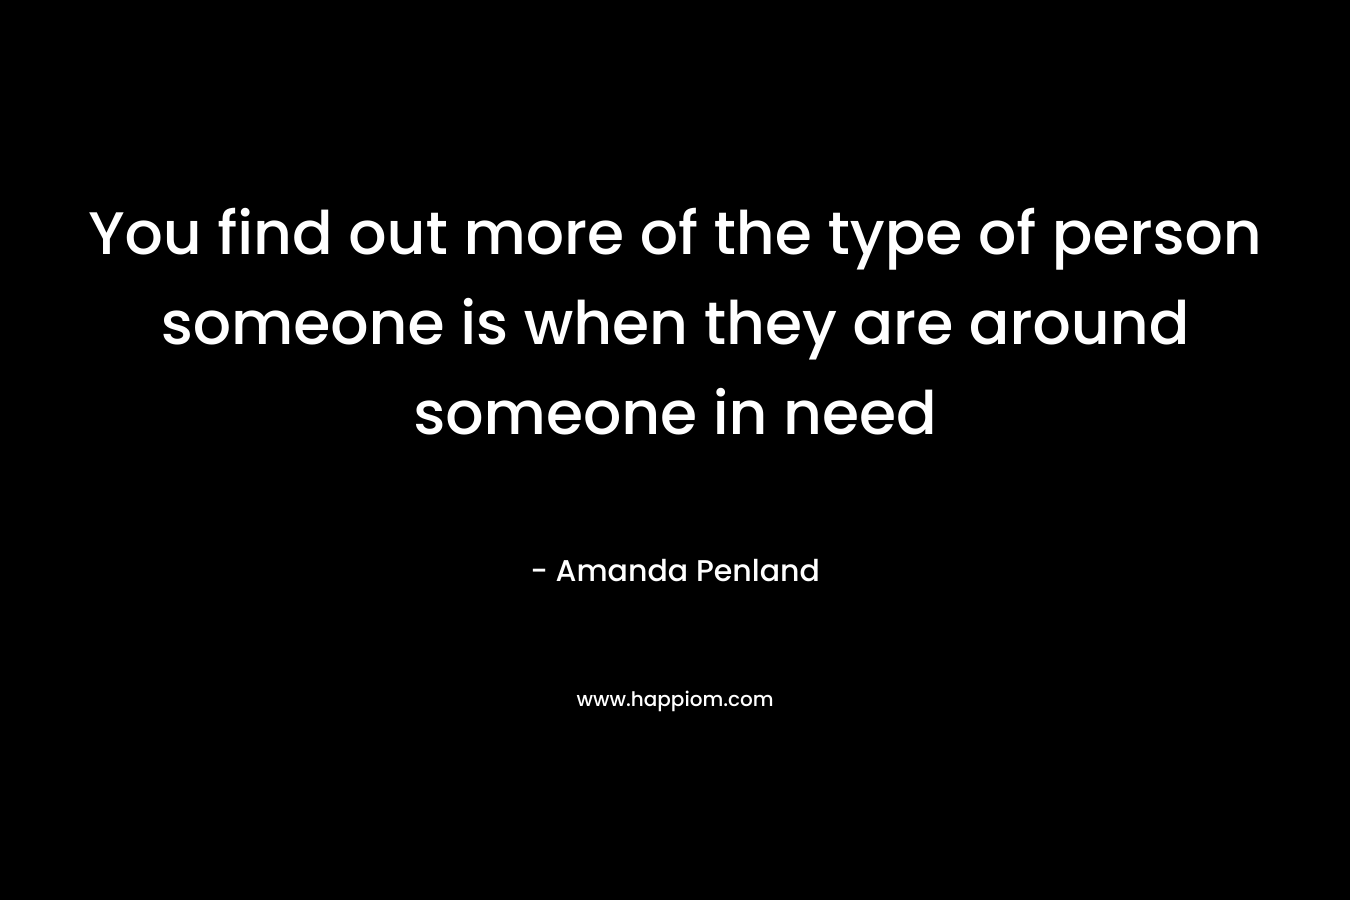 You find out more of the type of person someone is when they are around someone in need